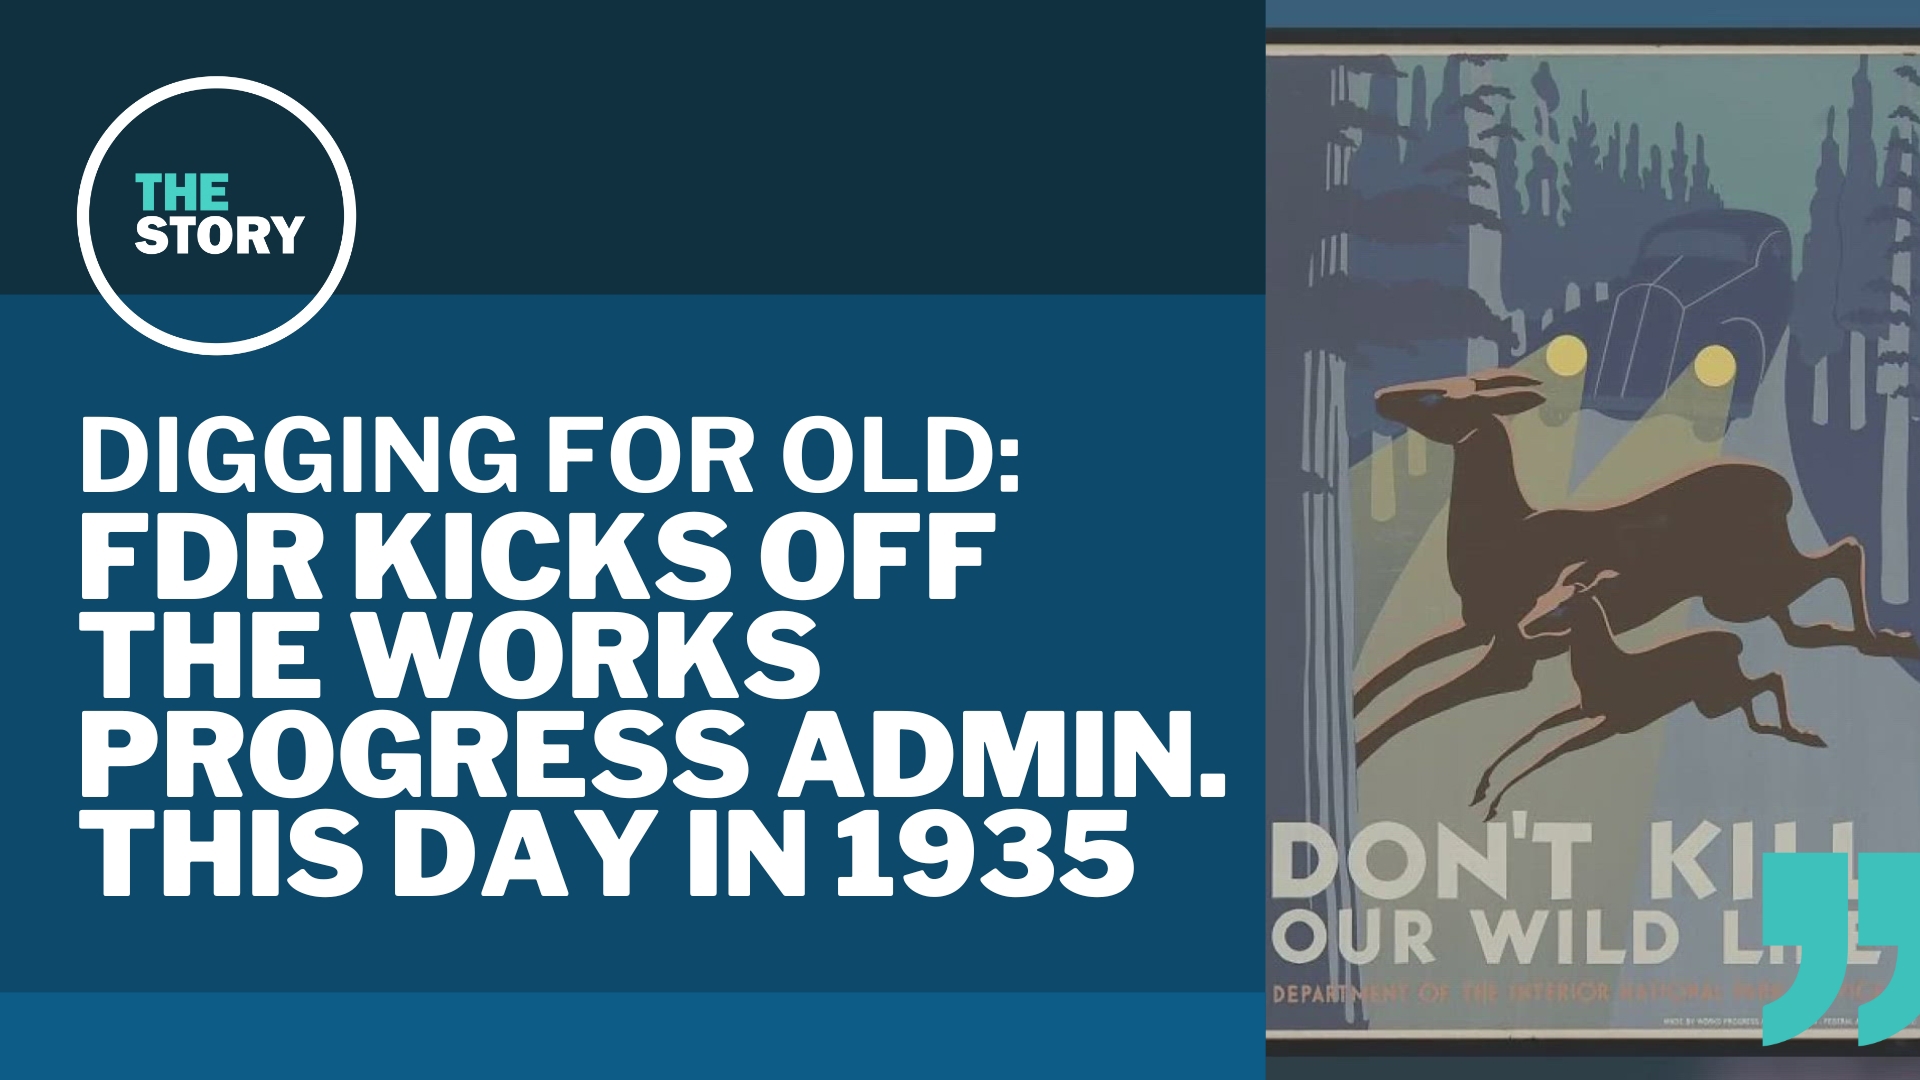 President FDR created the WPA through an executive order on May 6, 1935. It was meant to get Americans back to work amid the Great Depression.